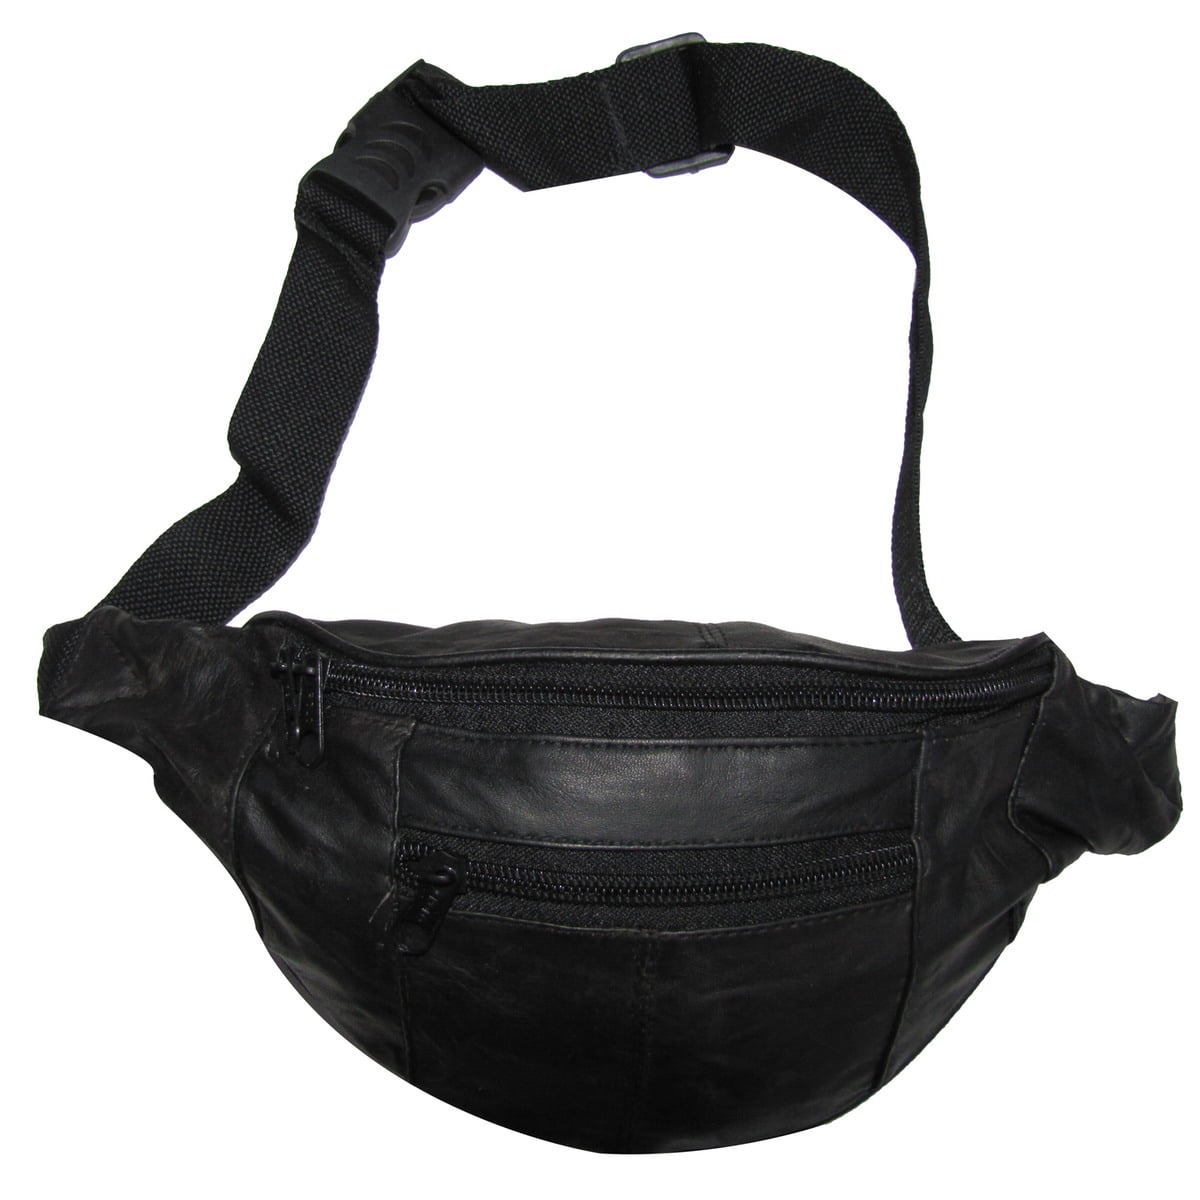 Black Bumbag Money Belt Real Leather Waist Mobile Pouch 1004 